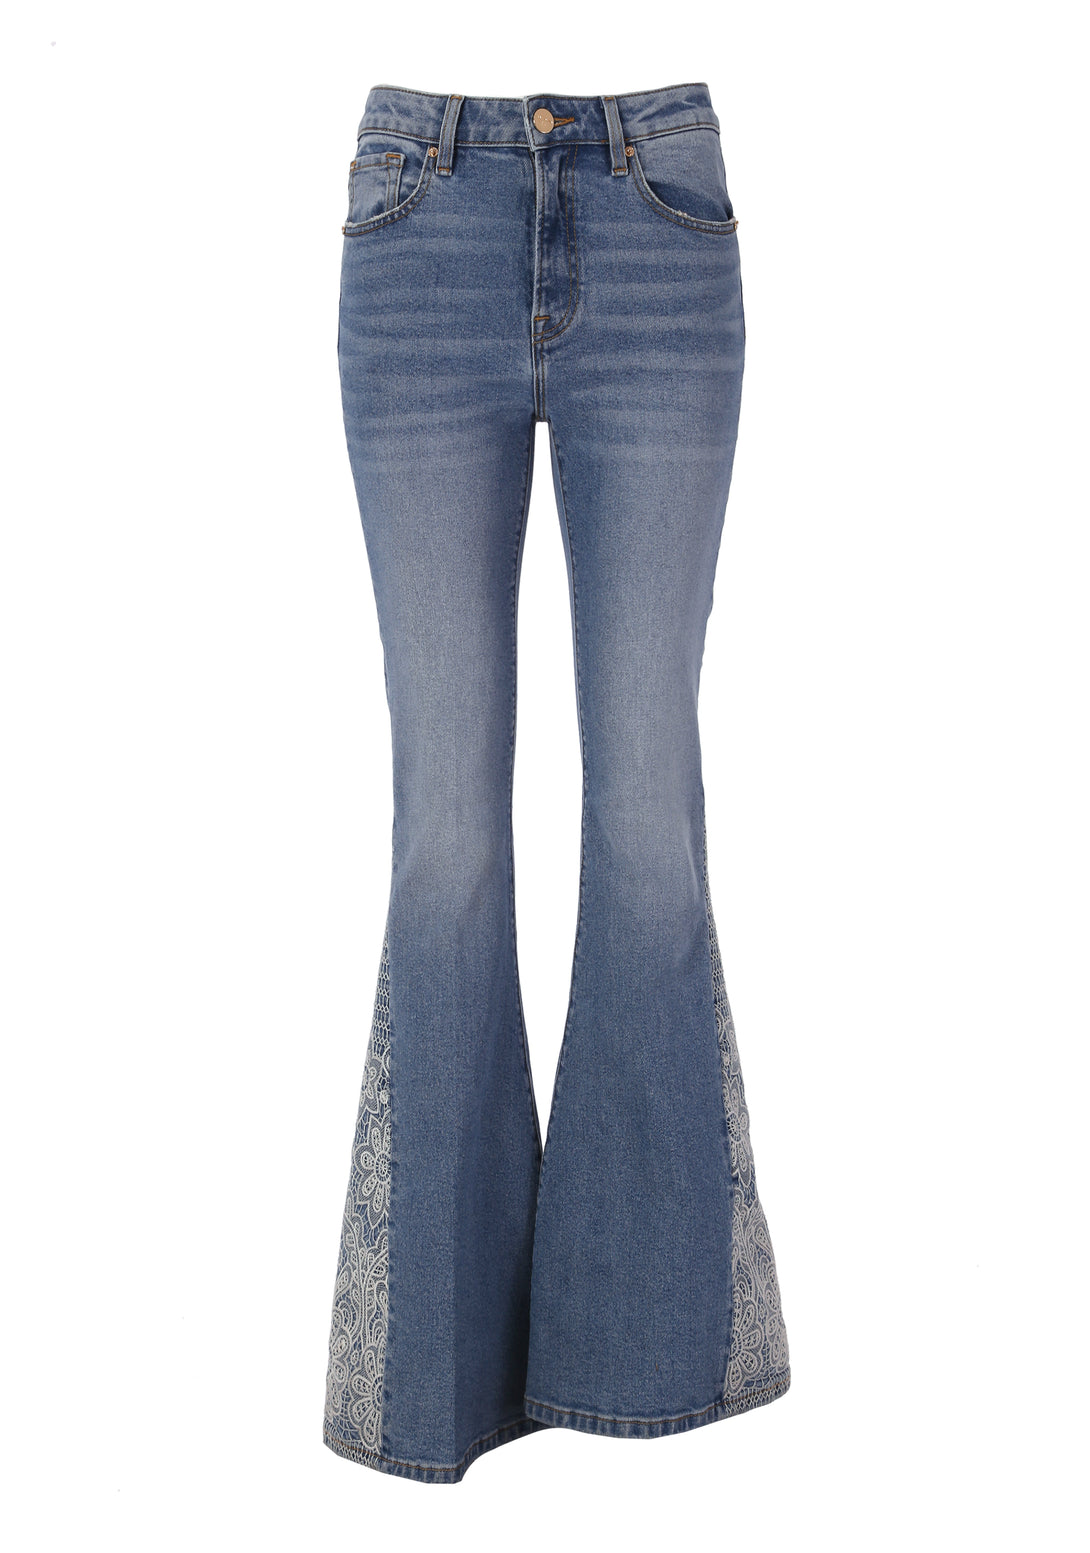 Bootcut pant made in denim with stone wash